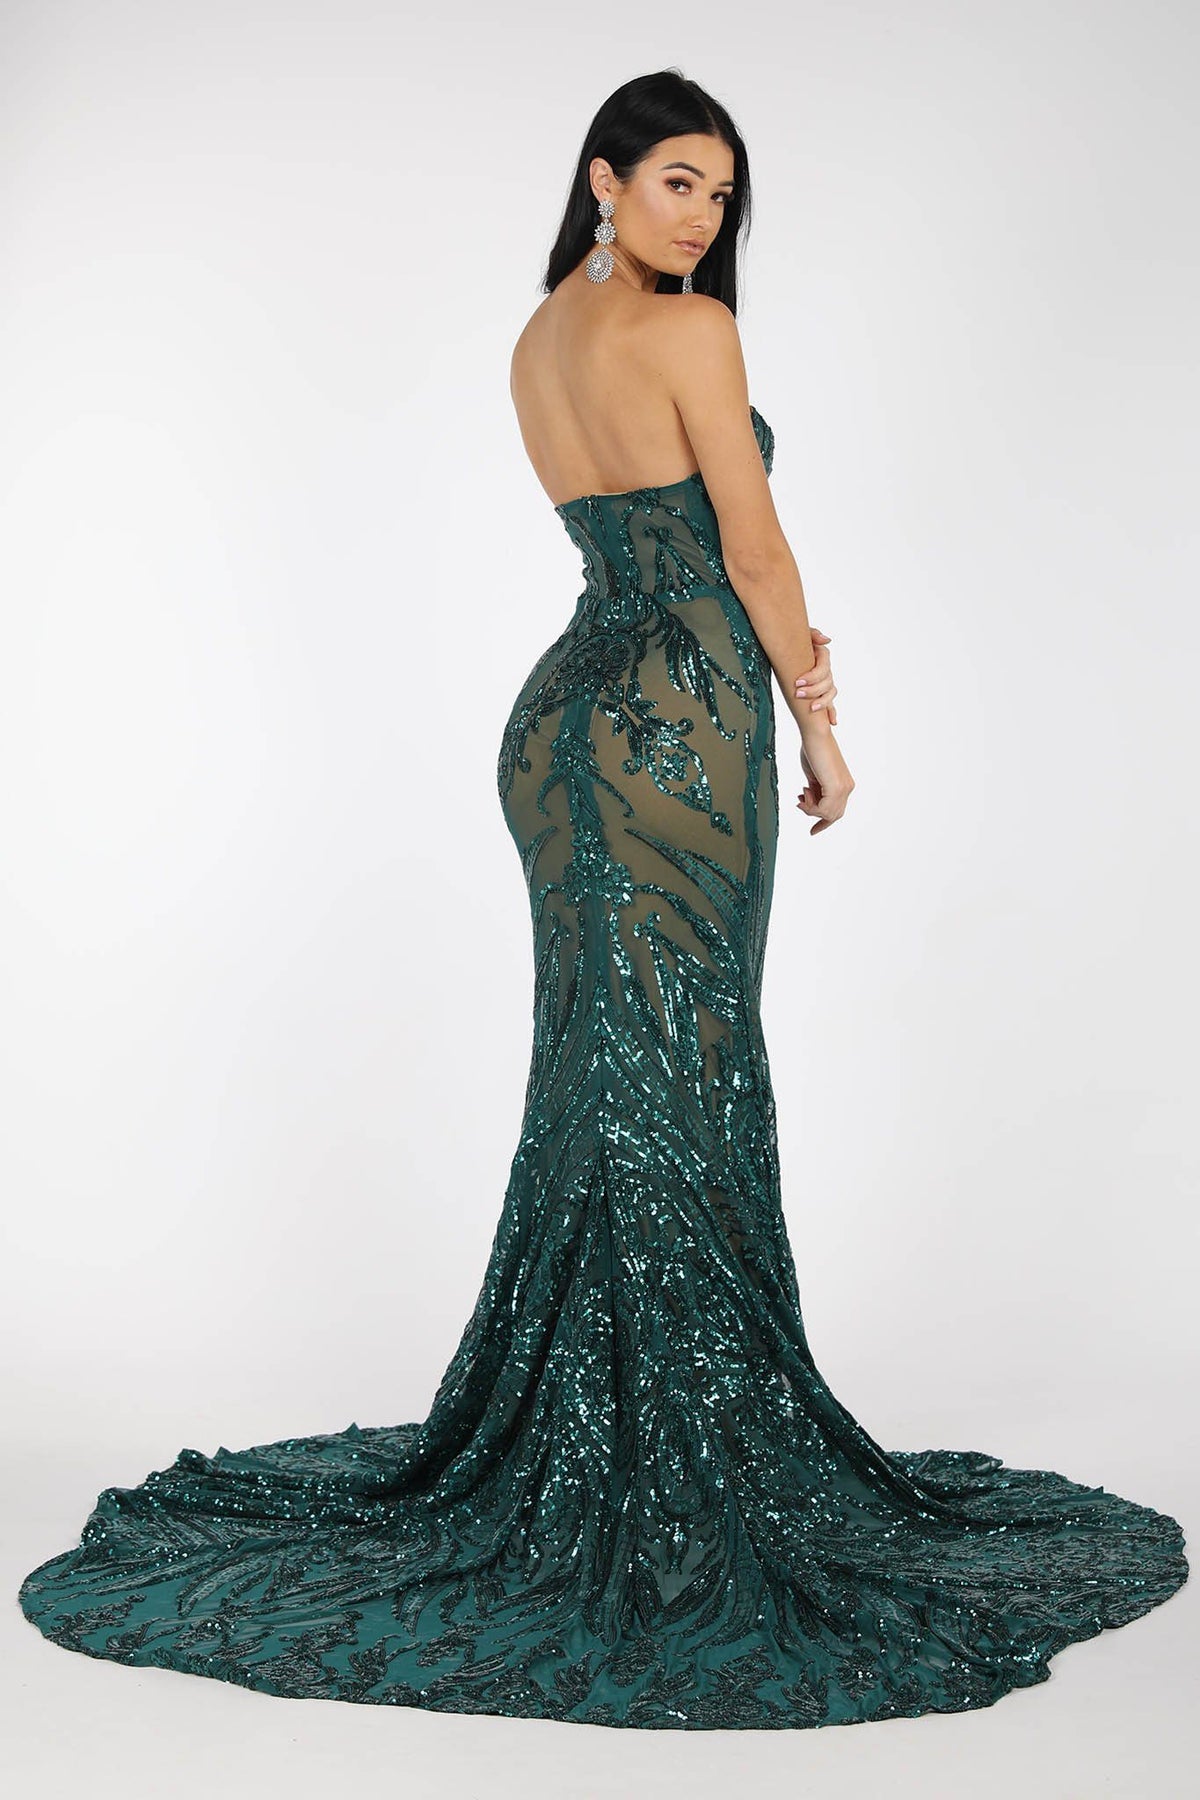 Gianna Gown Without Boned Bodice - Emerald/Nude